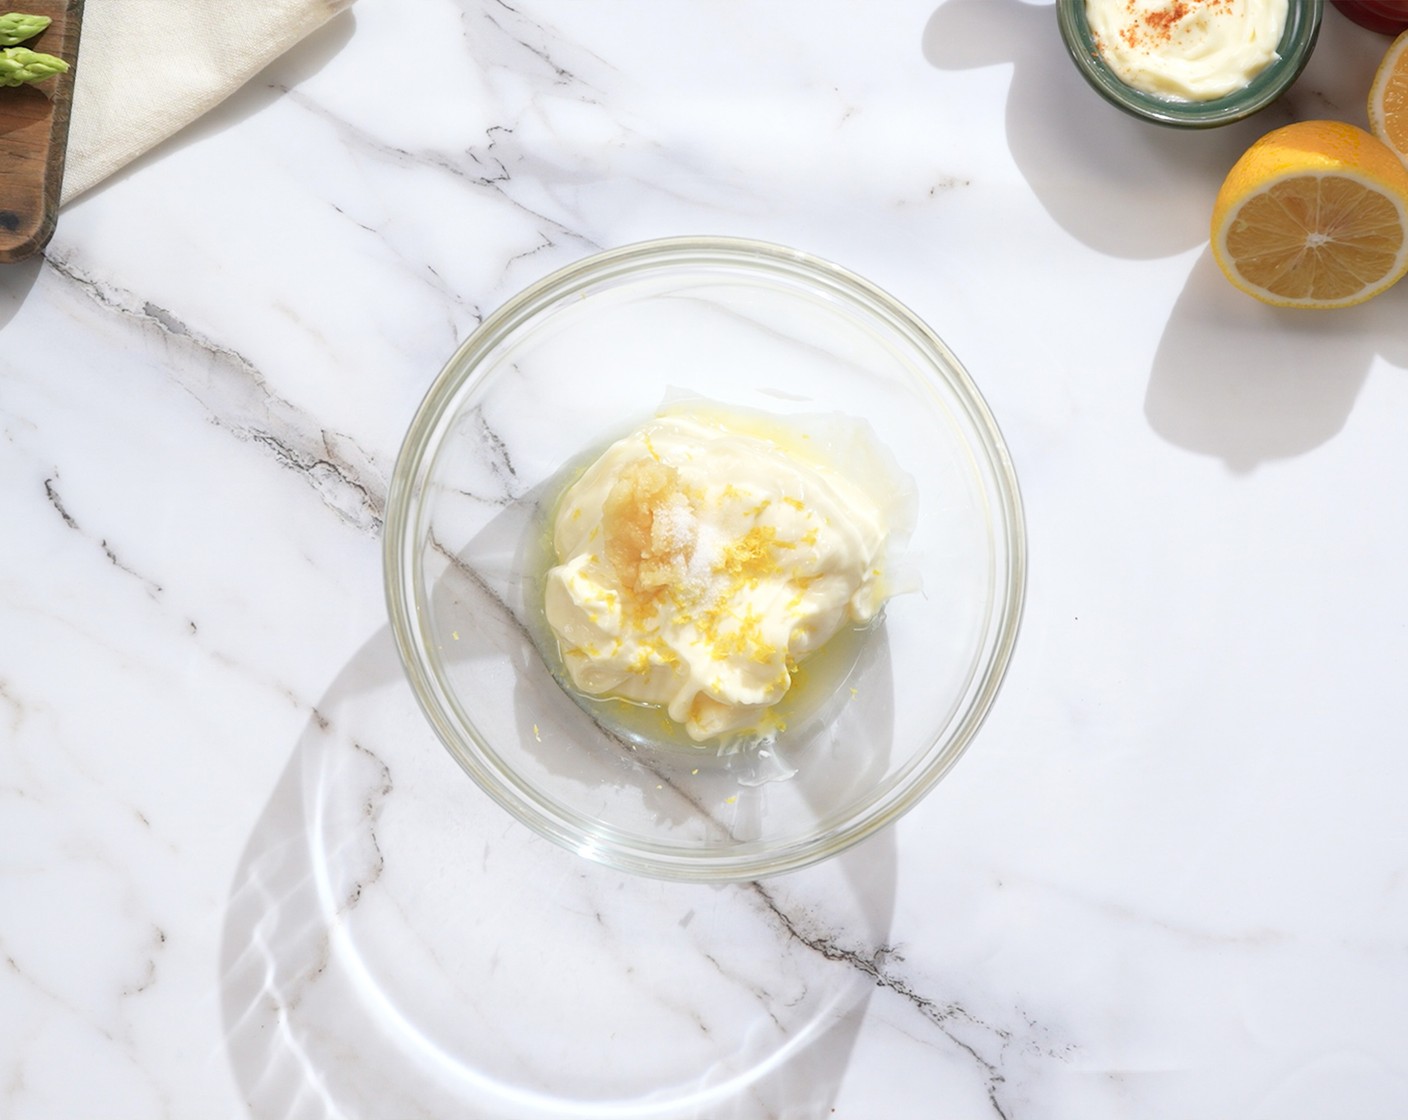 step 1 To make the lemon aioli, combine Mayonnaise (1/2 cup), 1/4 tsp Lemon Zest, 2 tsp Lemon (1), Garlic (2 cloves), and Salt (1/8 tsp) in a bowl. Refrigerate until ready to use.